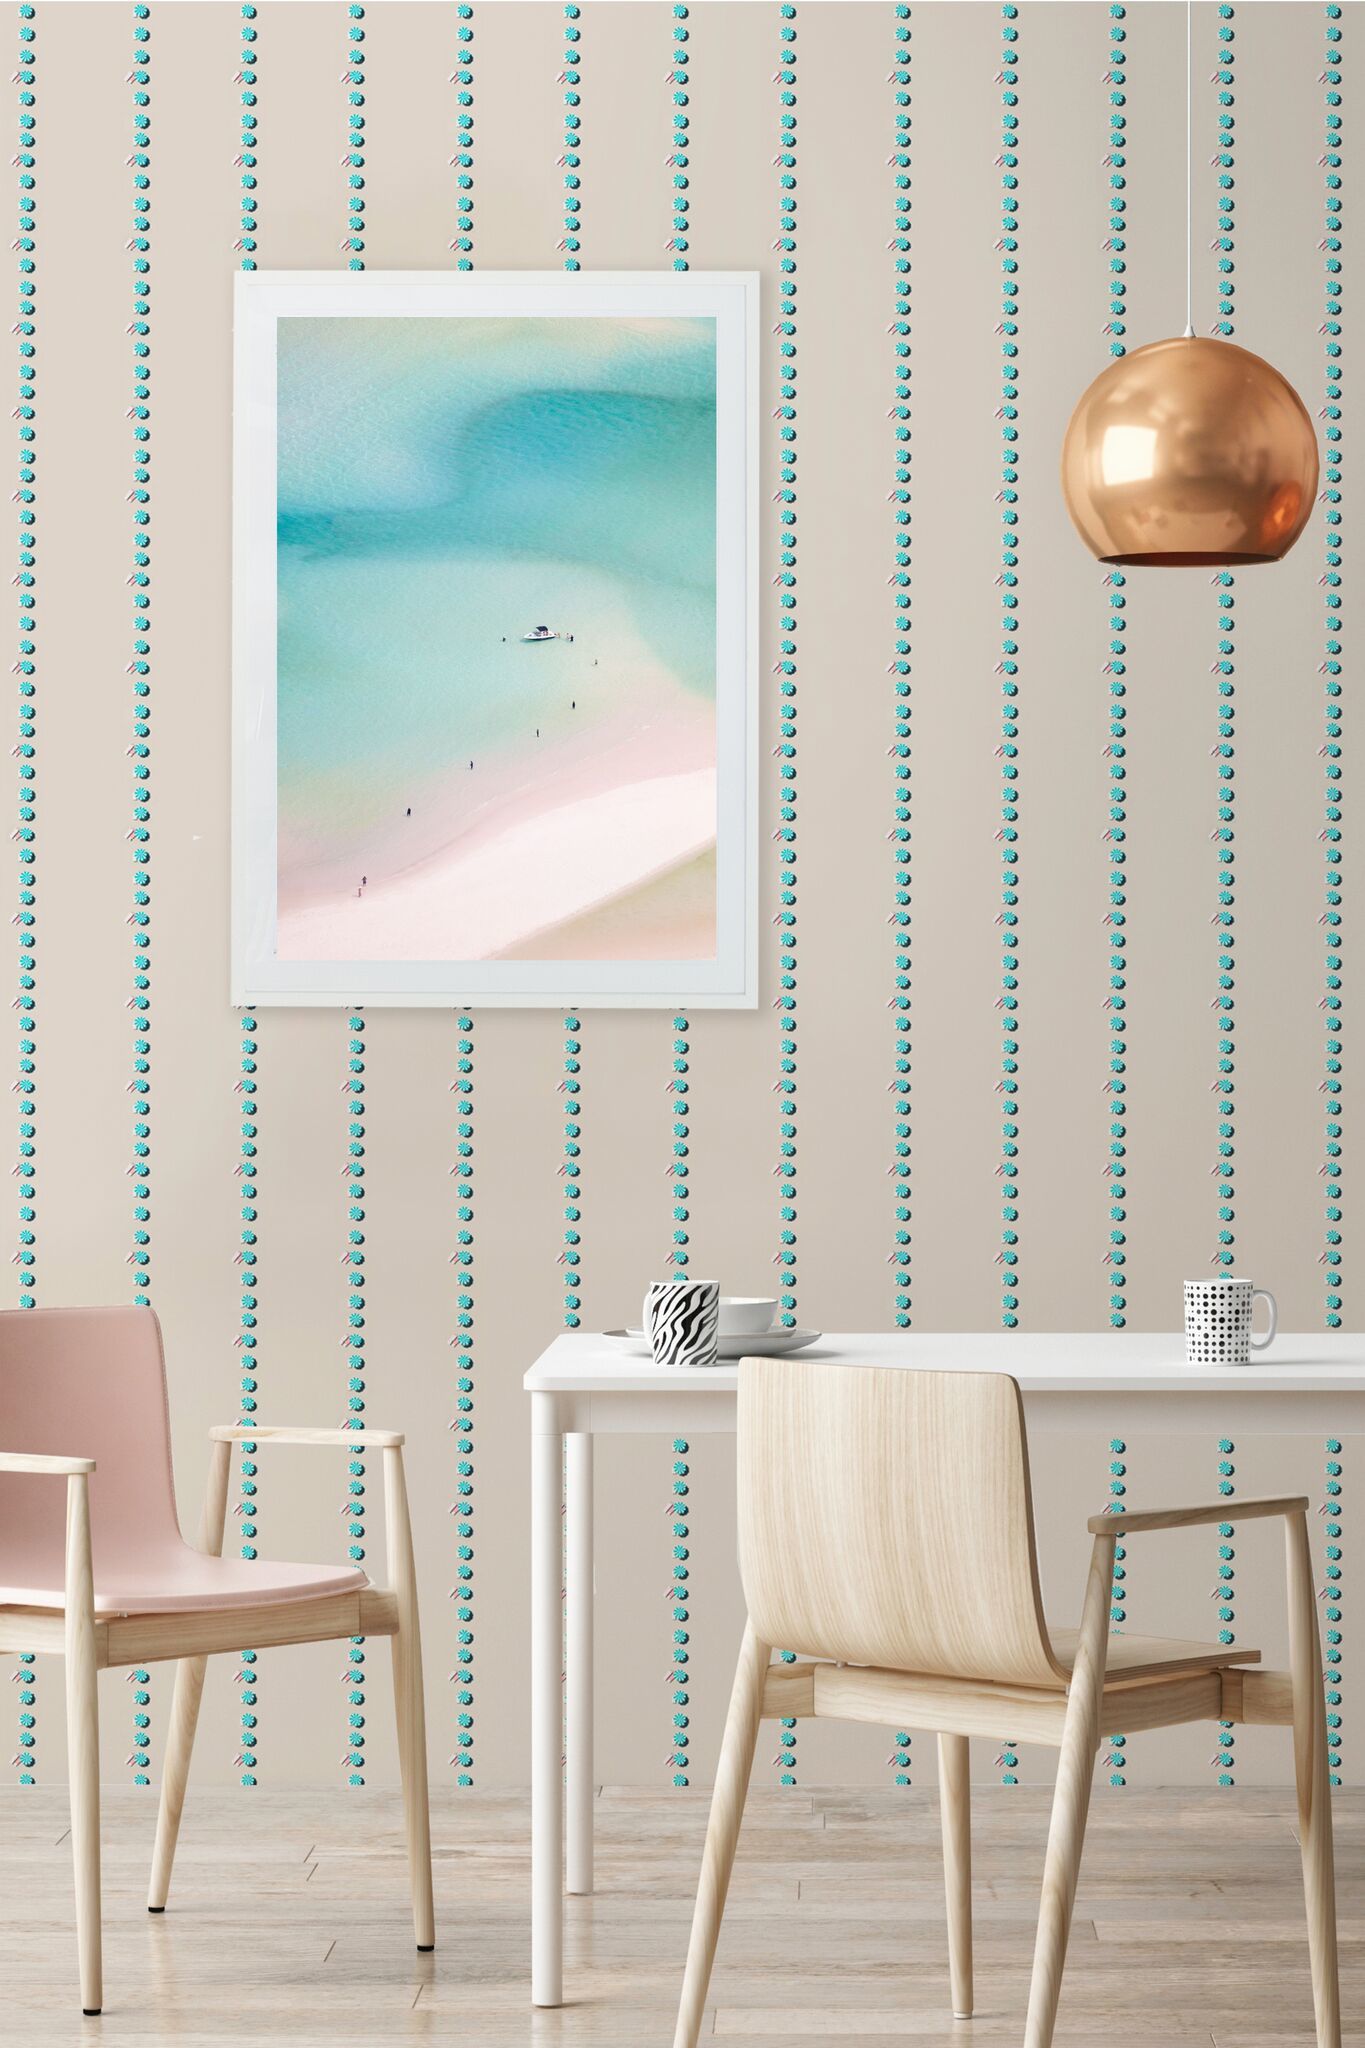 Naturally, I Love The Layering Of Artwork On Wallpaper - Interior Design , HD Wallpaper & Backgrounds